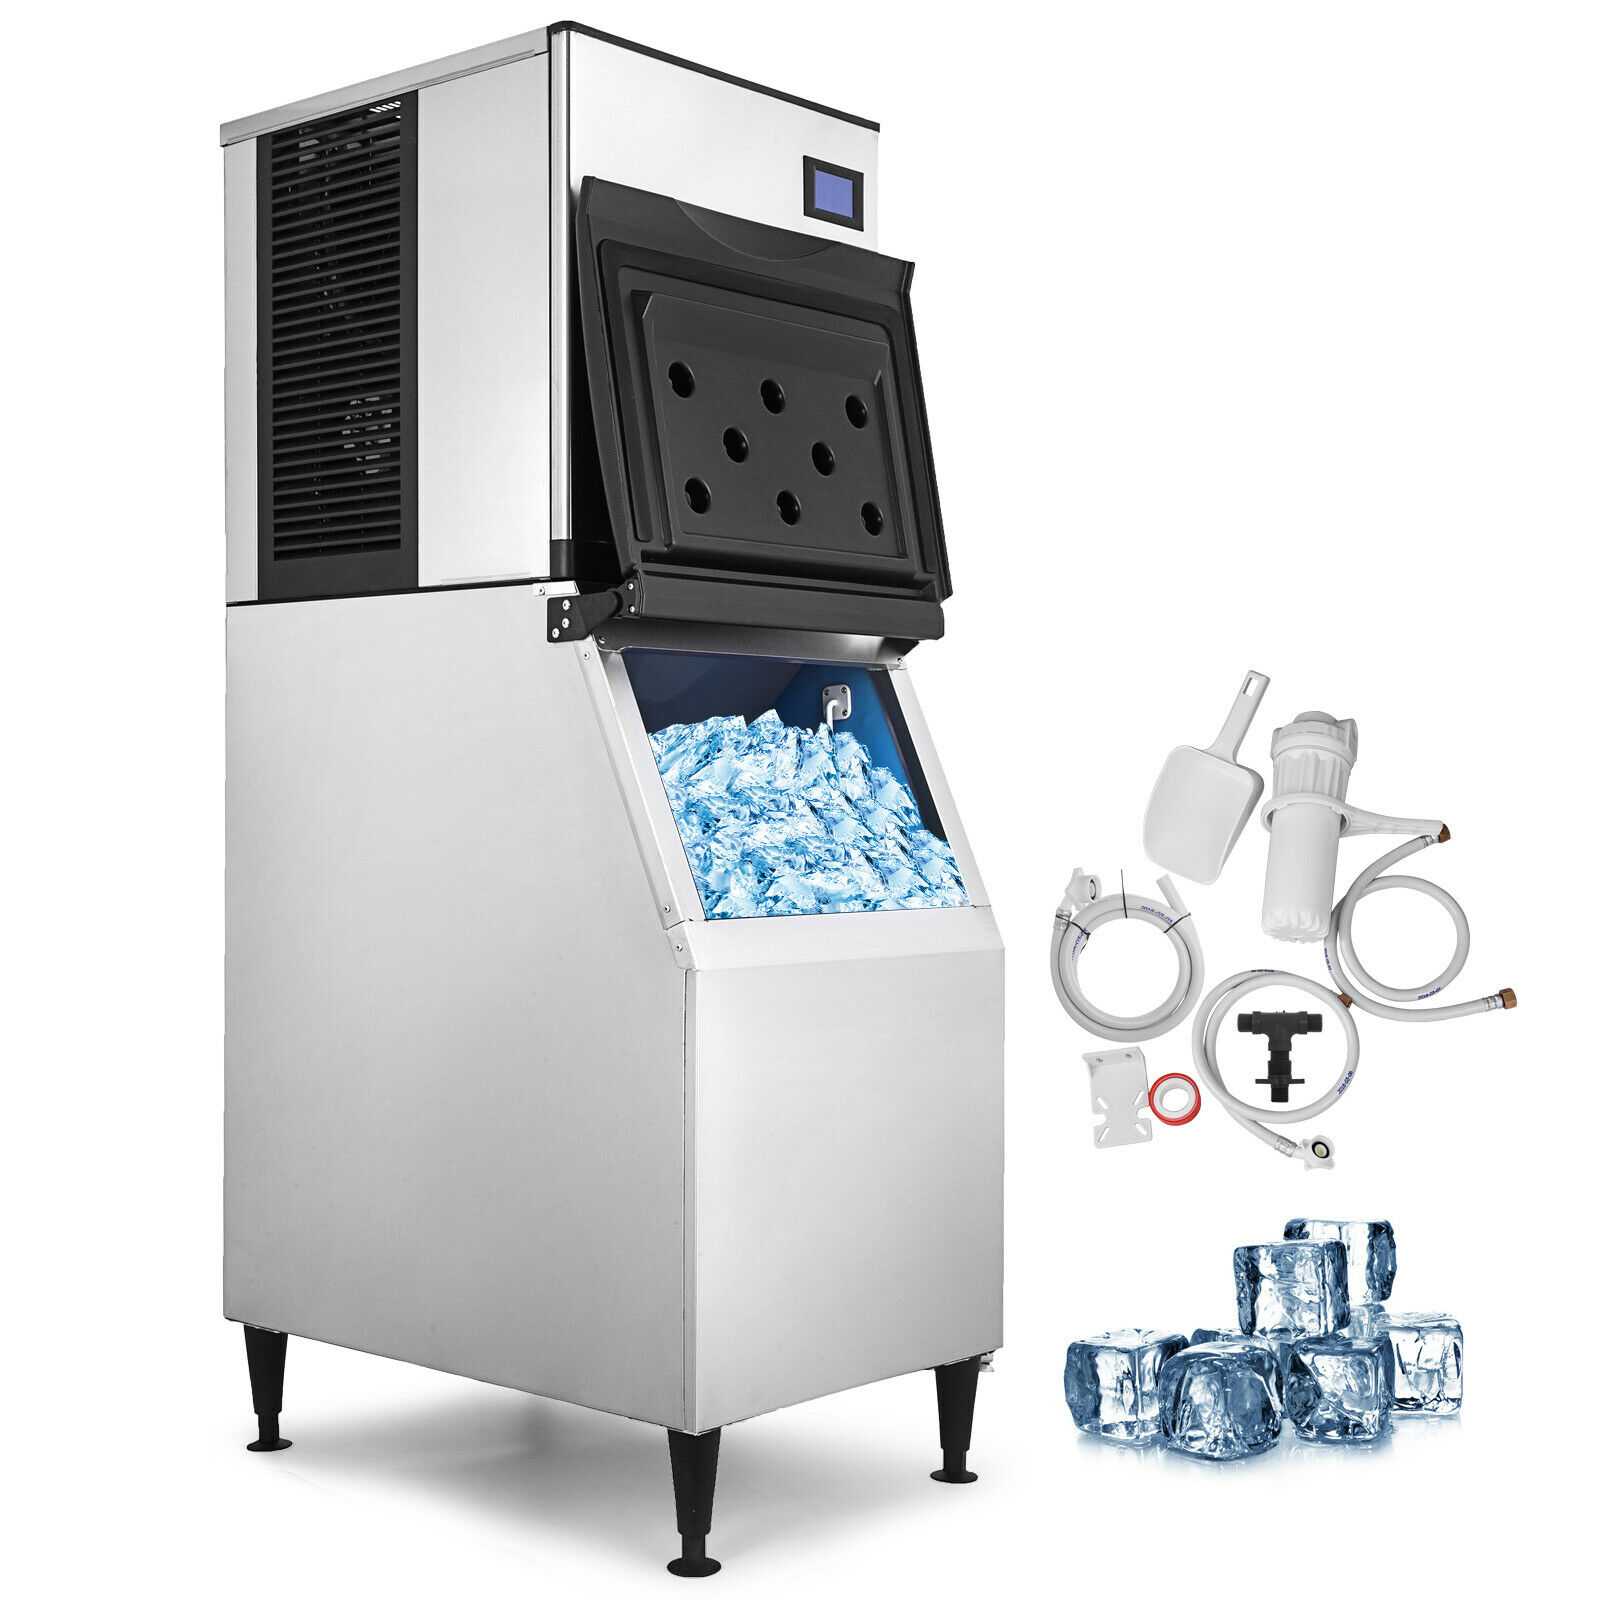 Maxx Ice Self-Contained Ice Machine, 260 lbs, Full Dice Ice Cubes